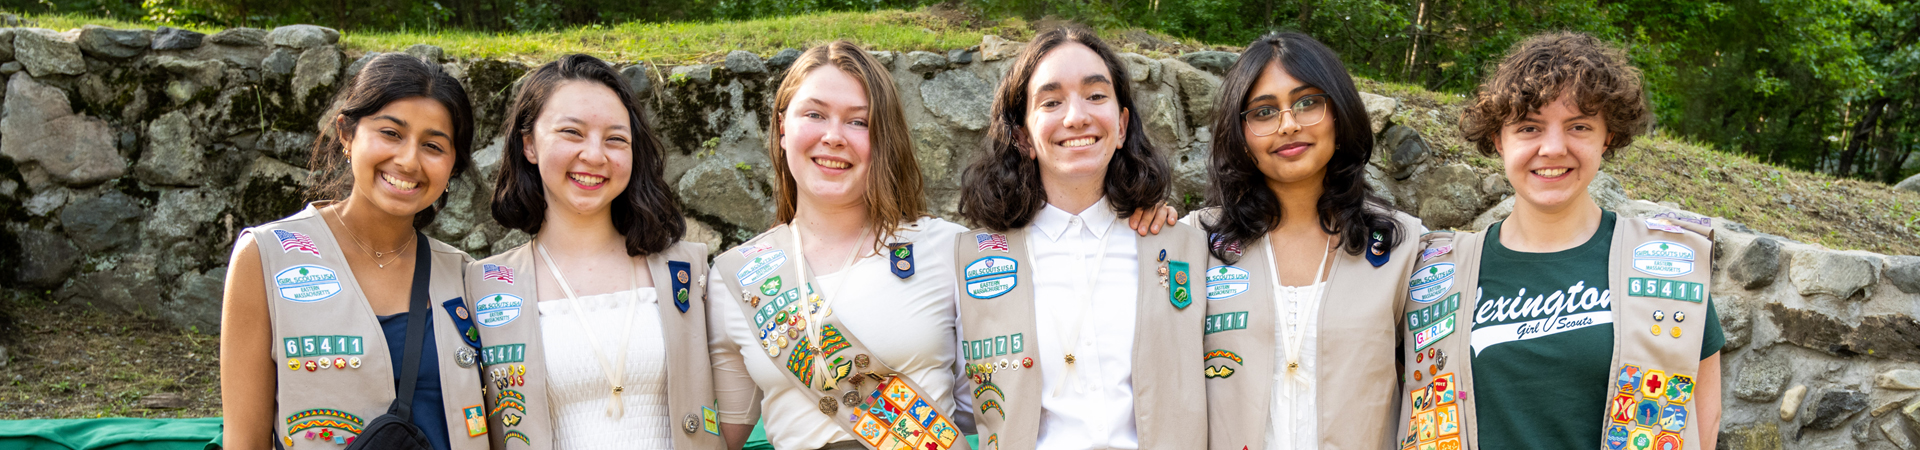  ©Ann-Marie Ford - portrait of gold award girl scouts wearing vests and smiling at camera in front of a brick building 